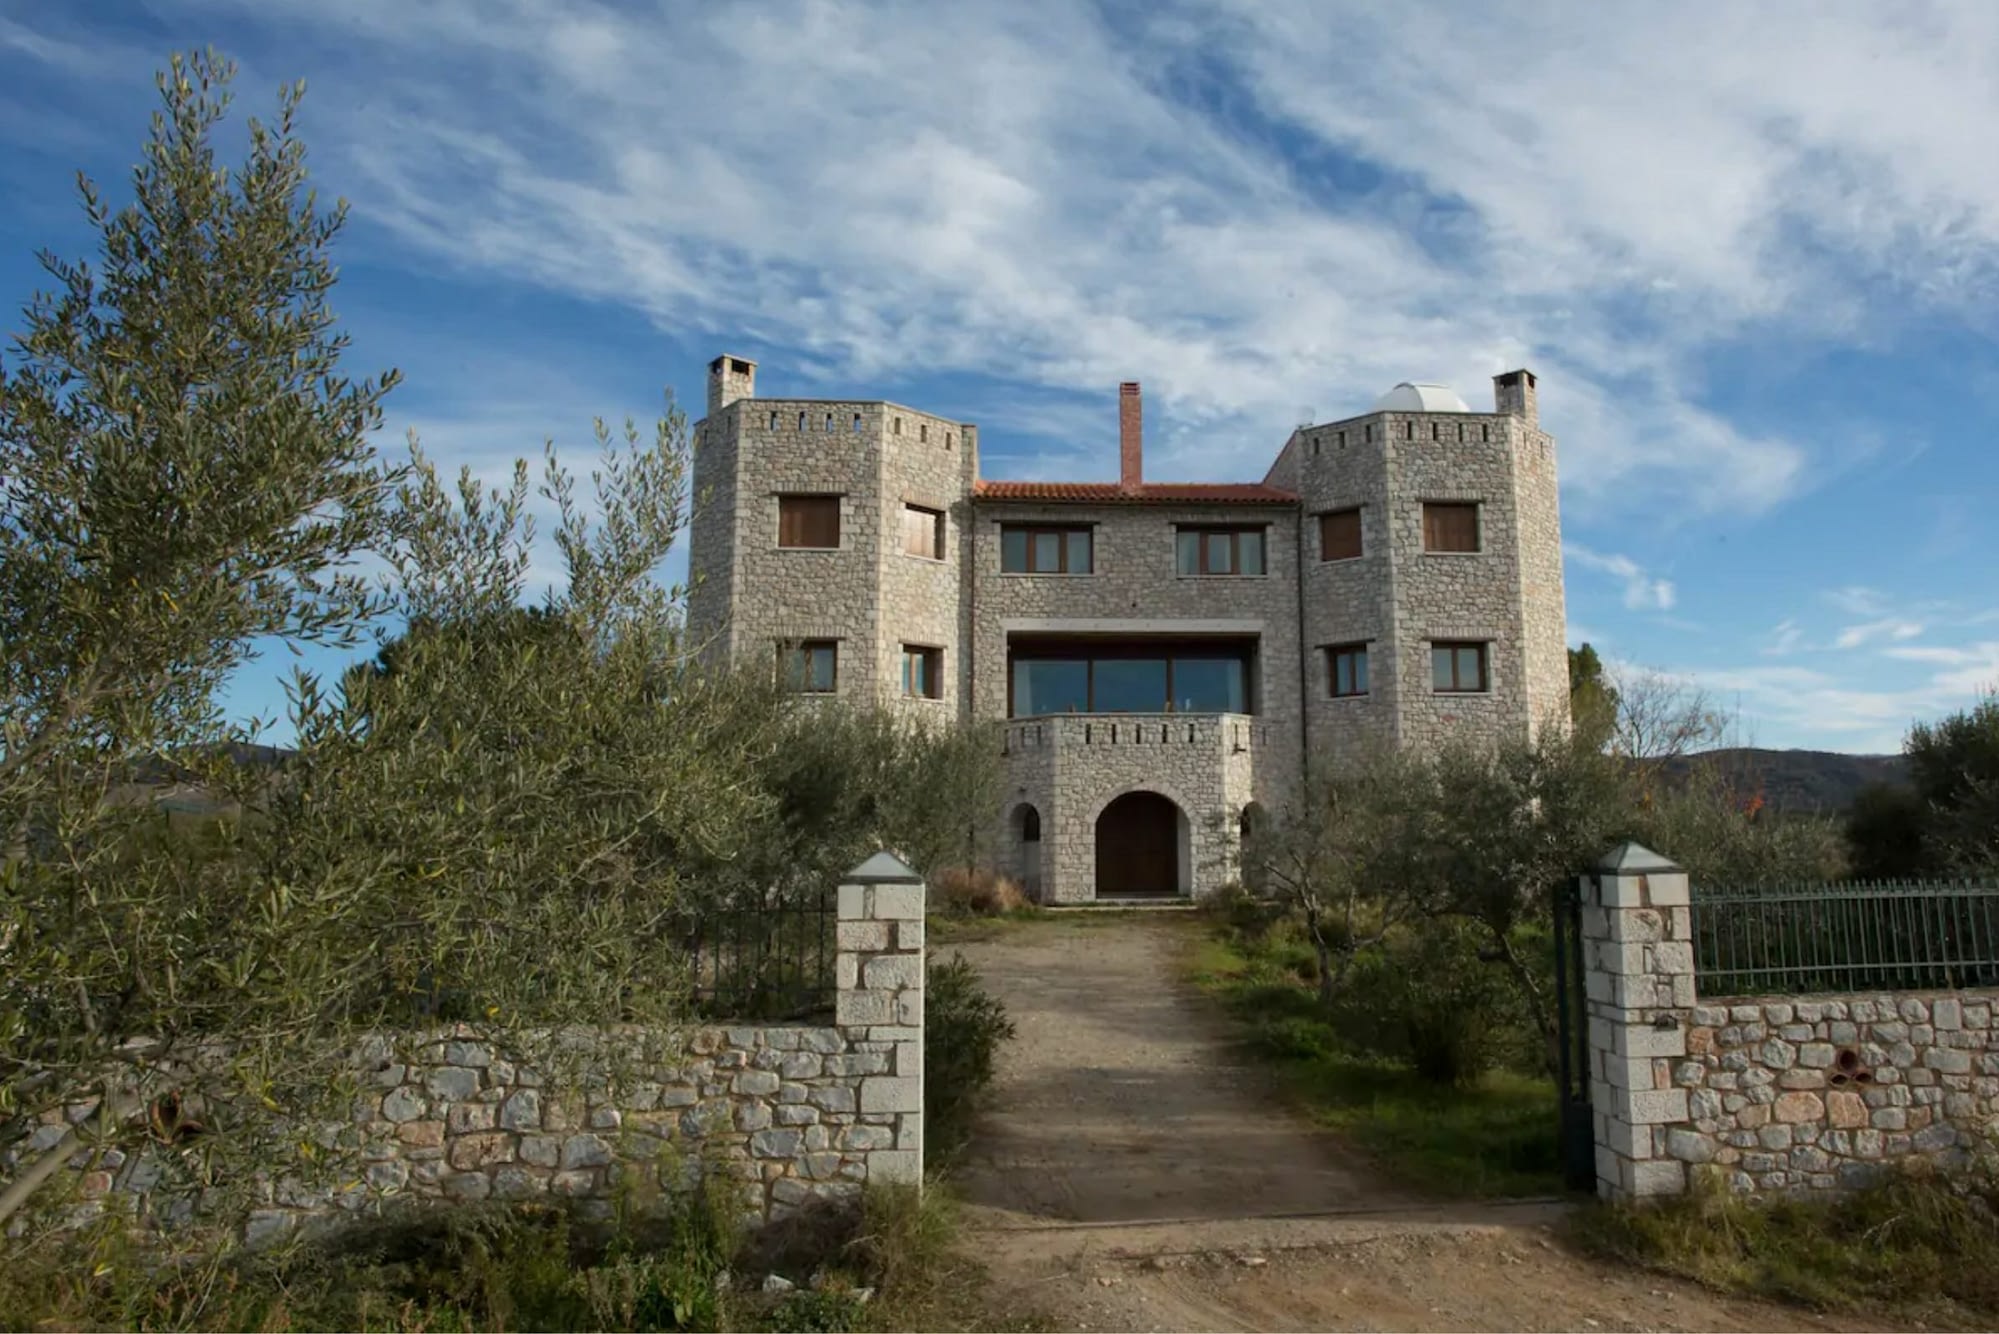 Recording in this beautiful castle close to Sparta - view castle front | Hit The Road Music Studio | Mobile Recording Studio